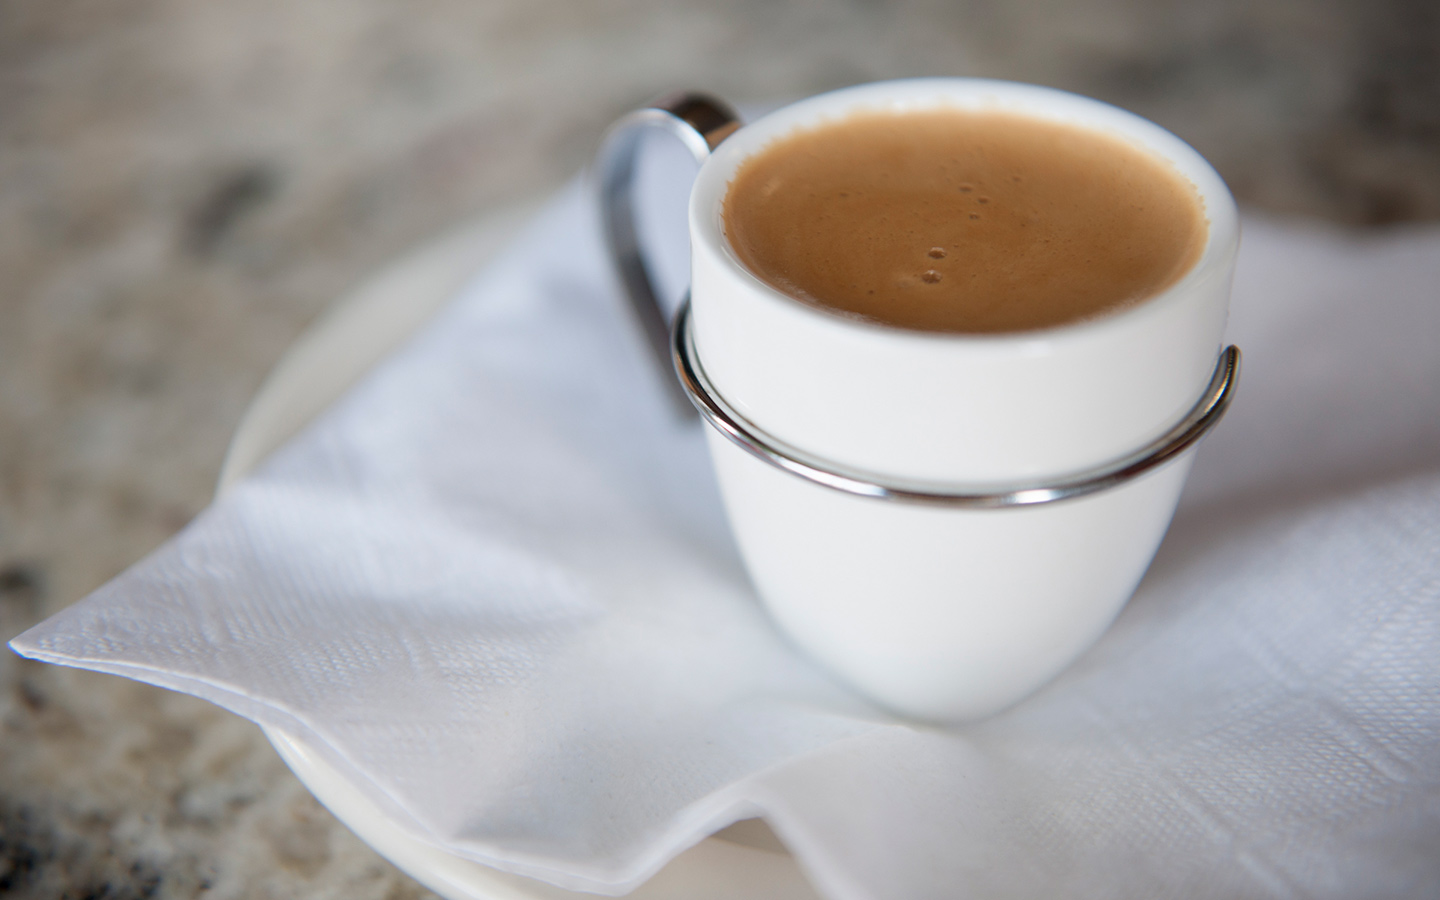 How to make an authentic Cafe Cubano (Cuban Coffee)